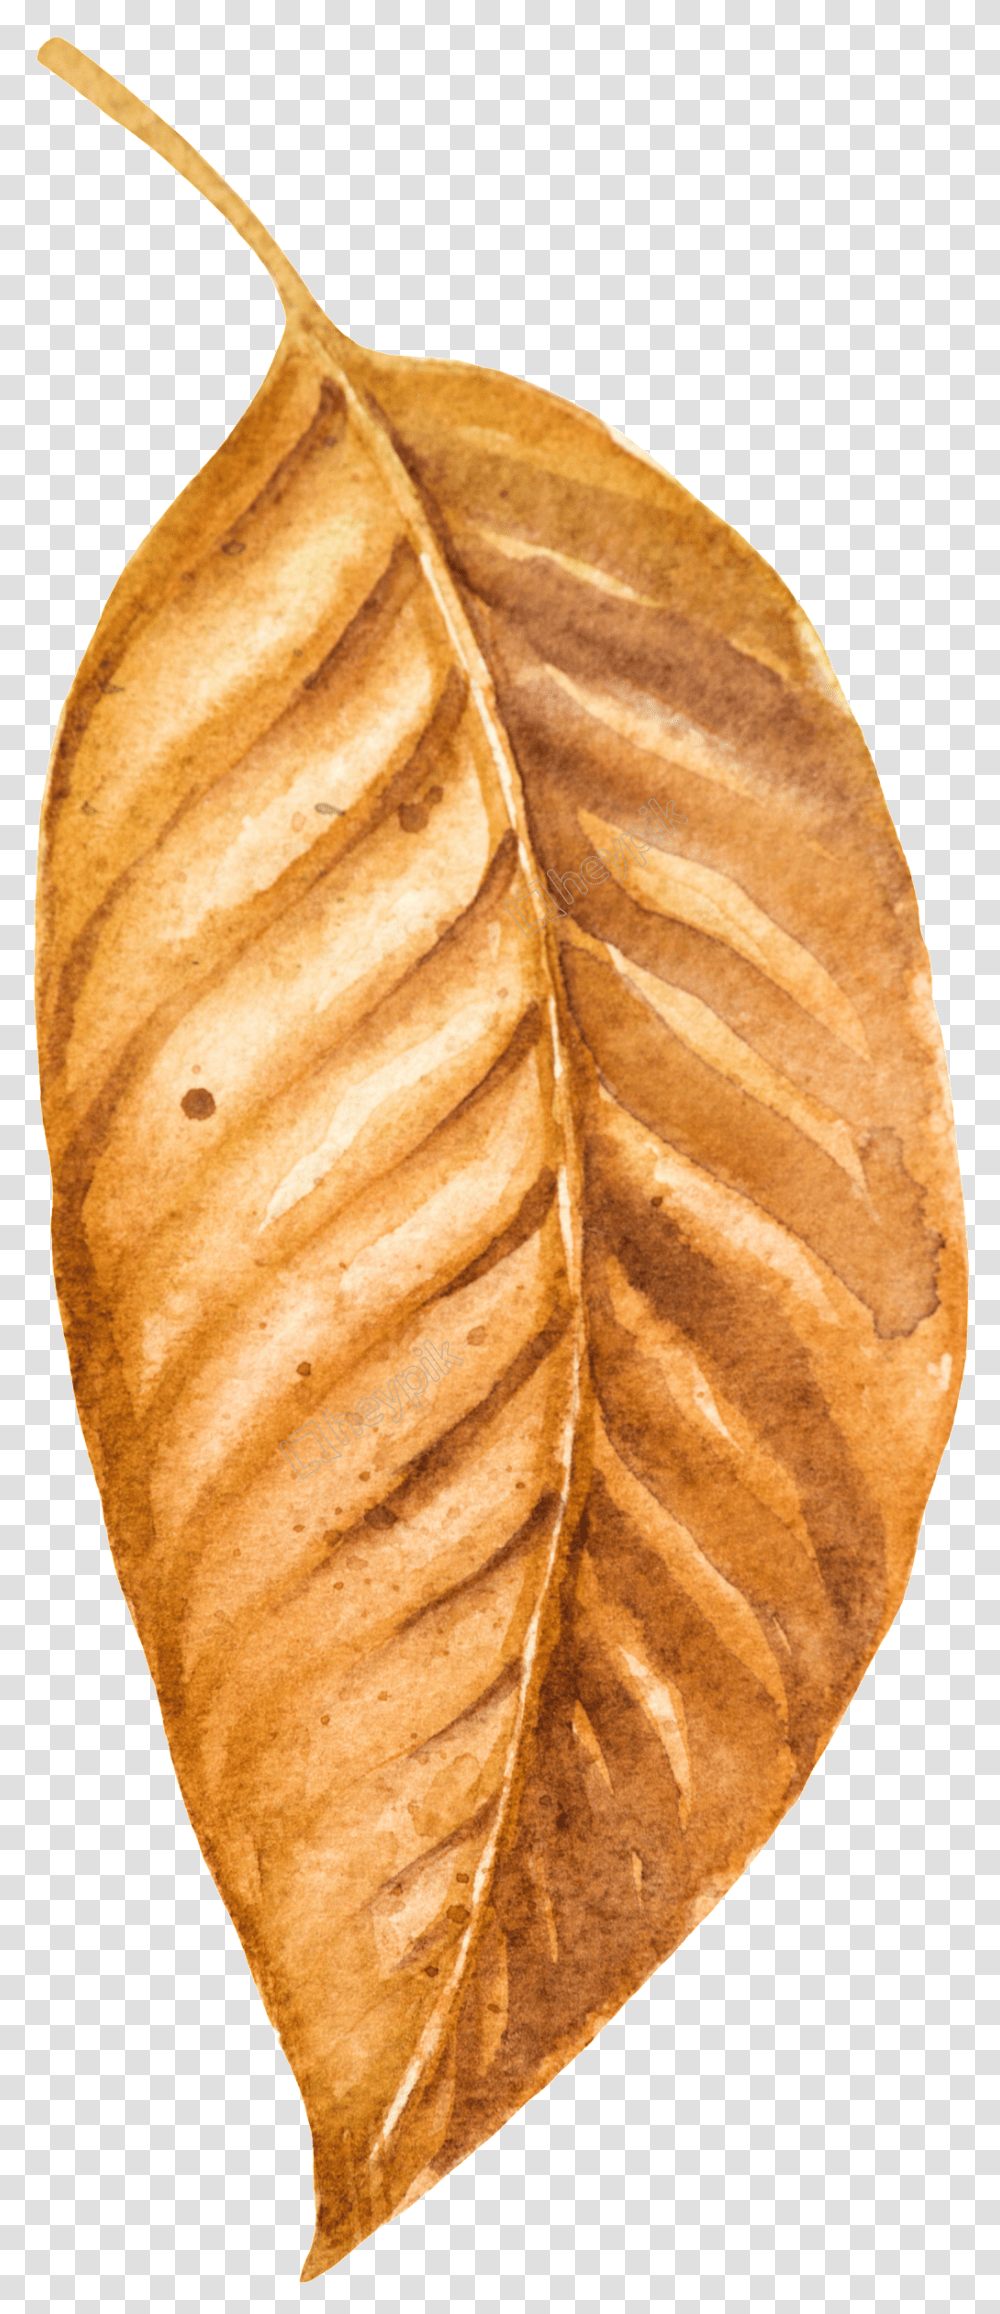 Drawn Leaf Dry Leave White Walnut, Plant, Bread, Food, Pineapple Transparent Png